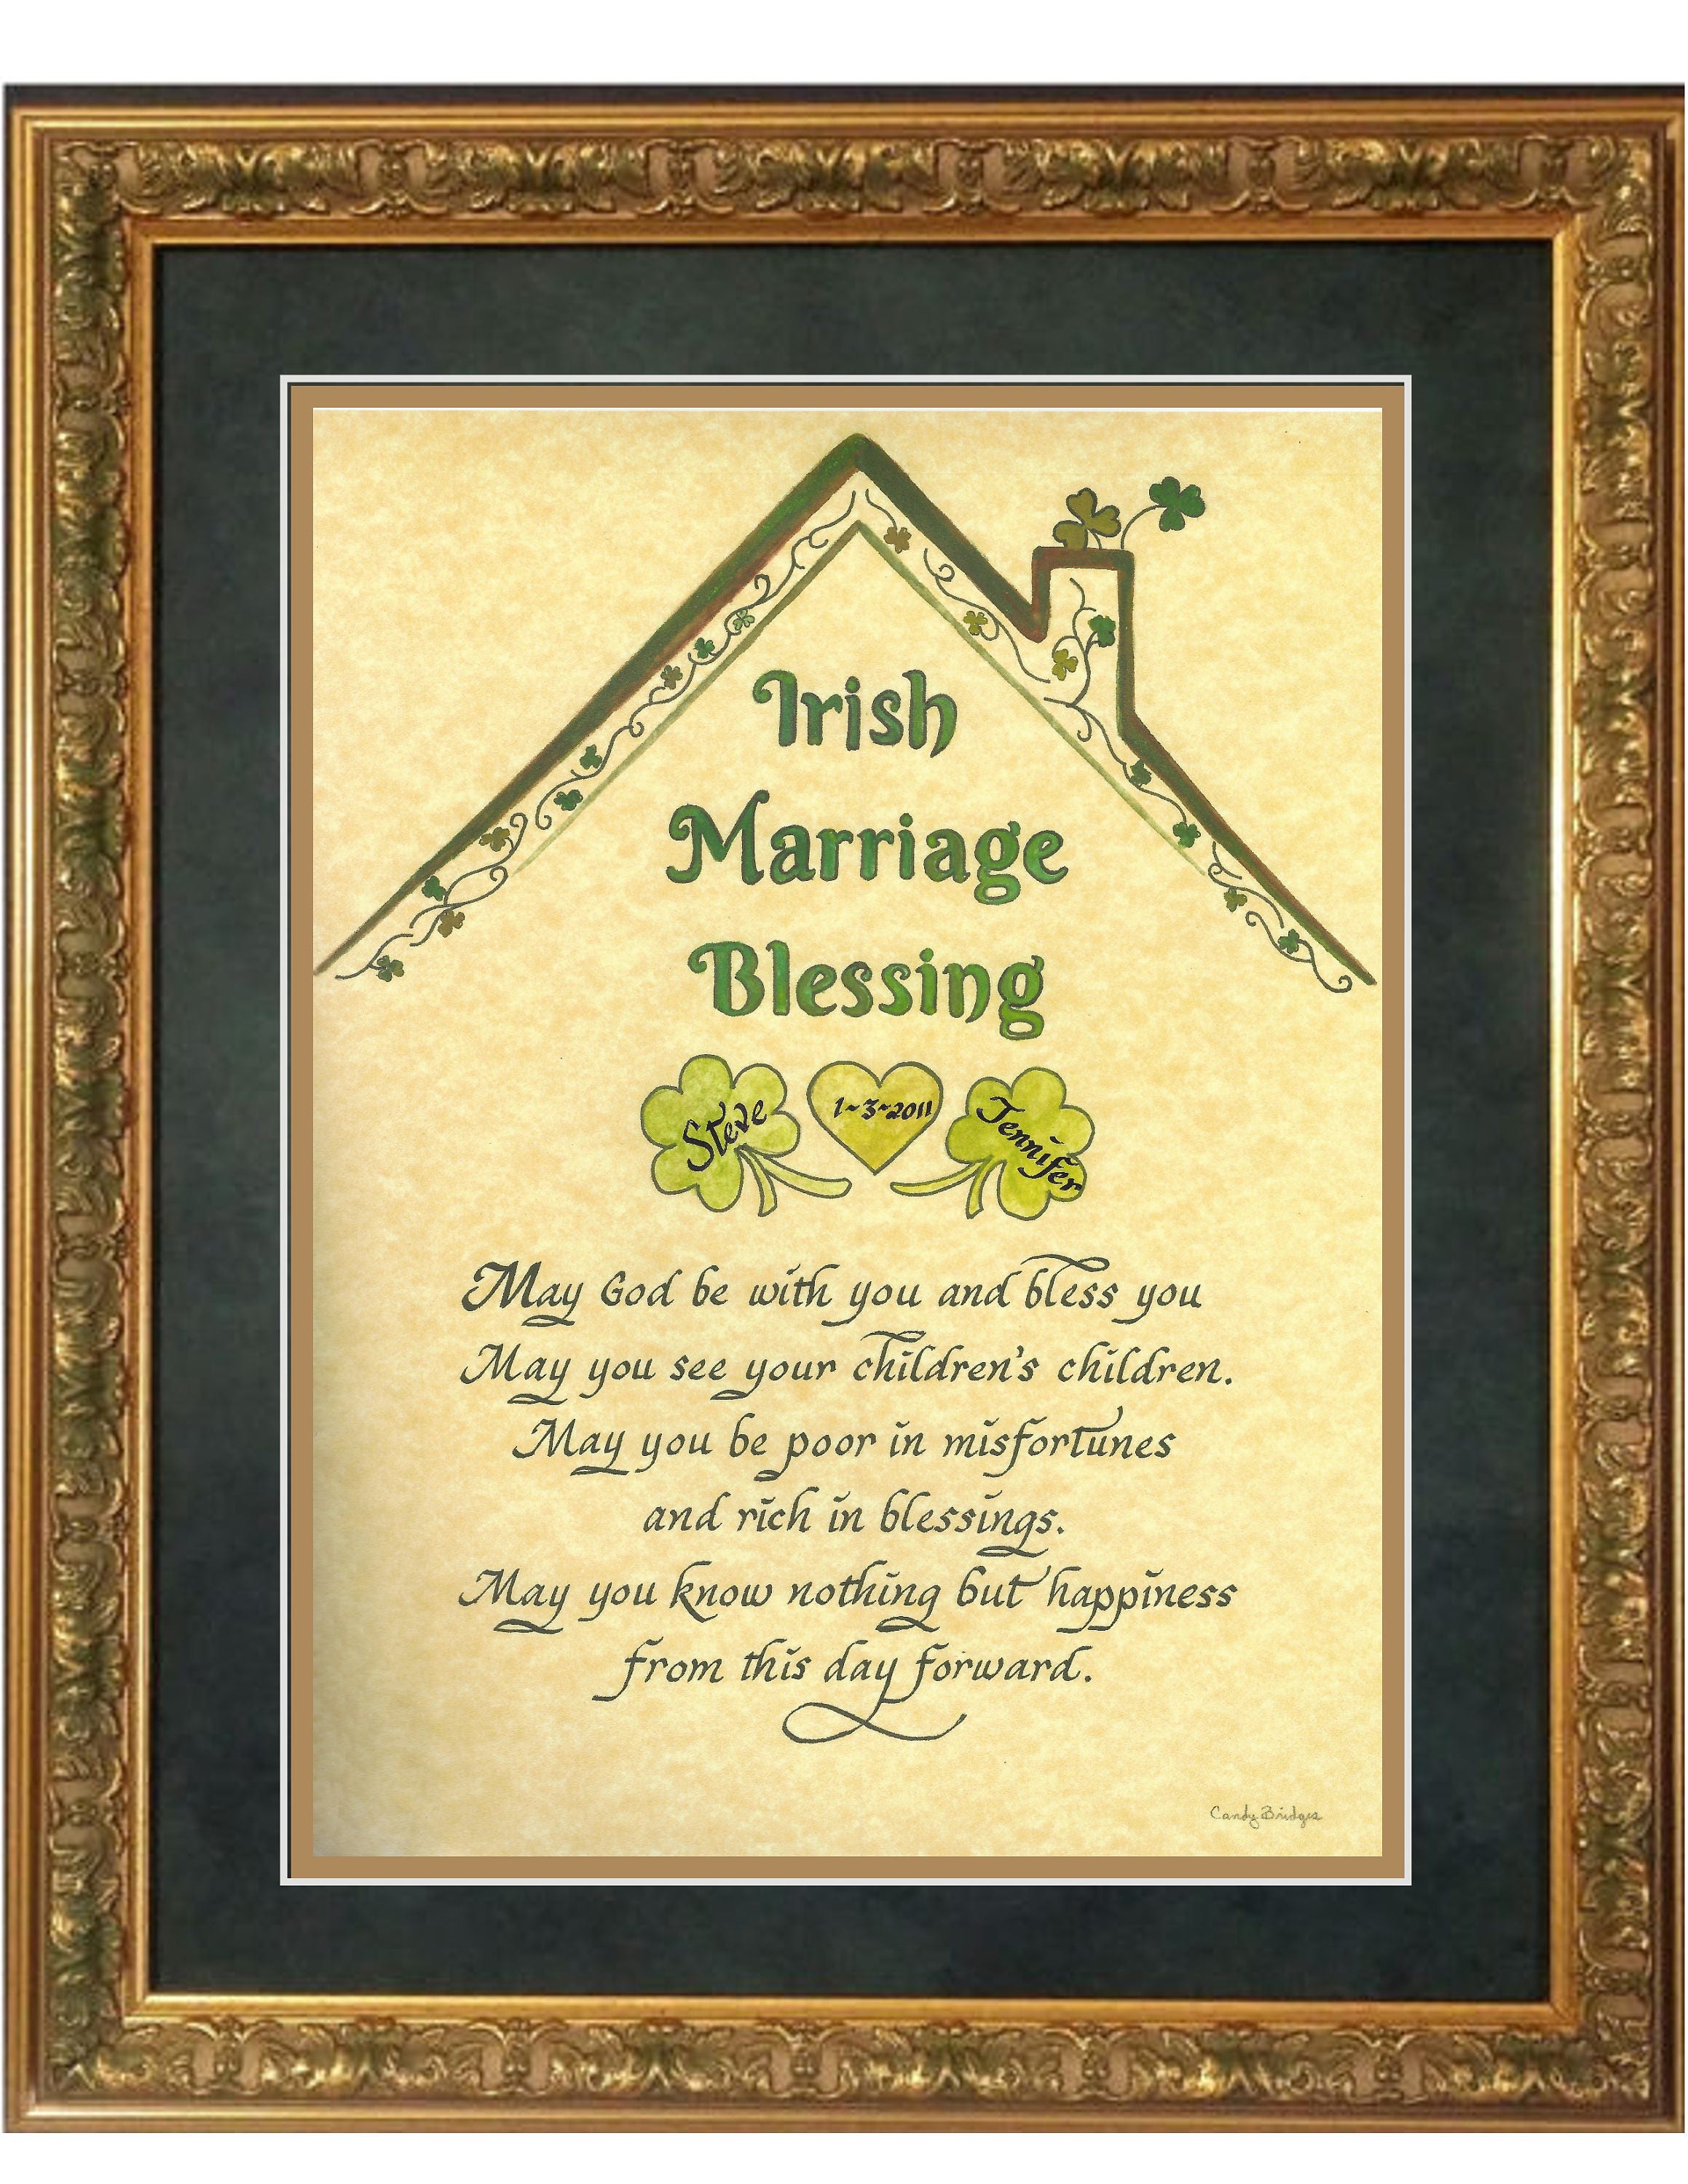 Irish Marriage Wedding Blessing For Bride And Groom With Shamrocks And